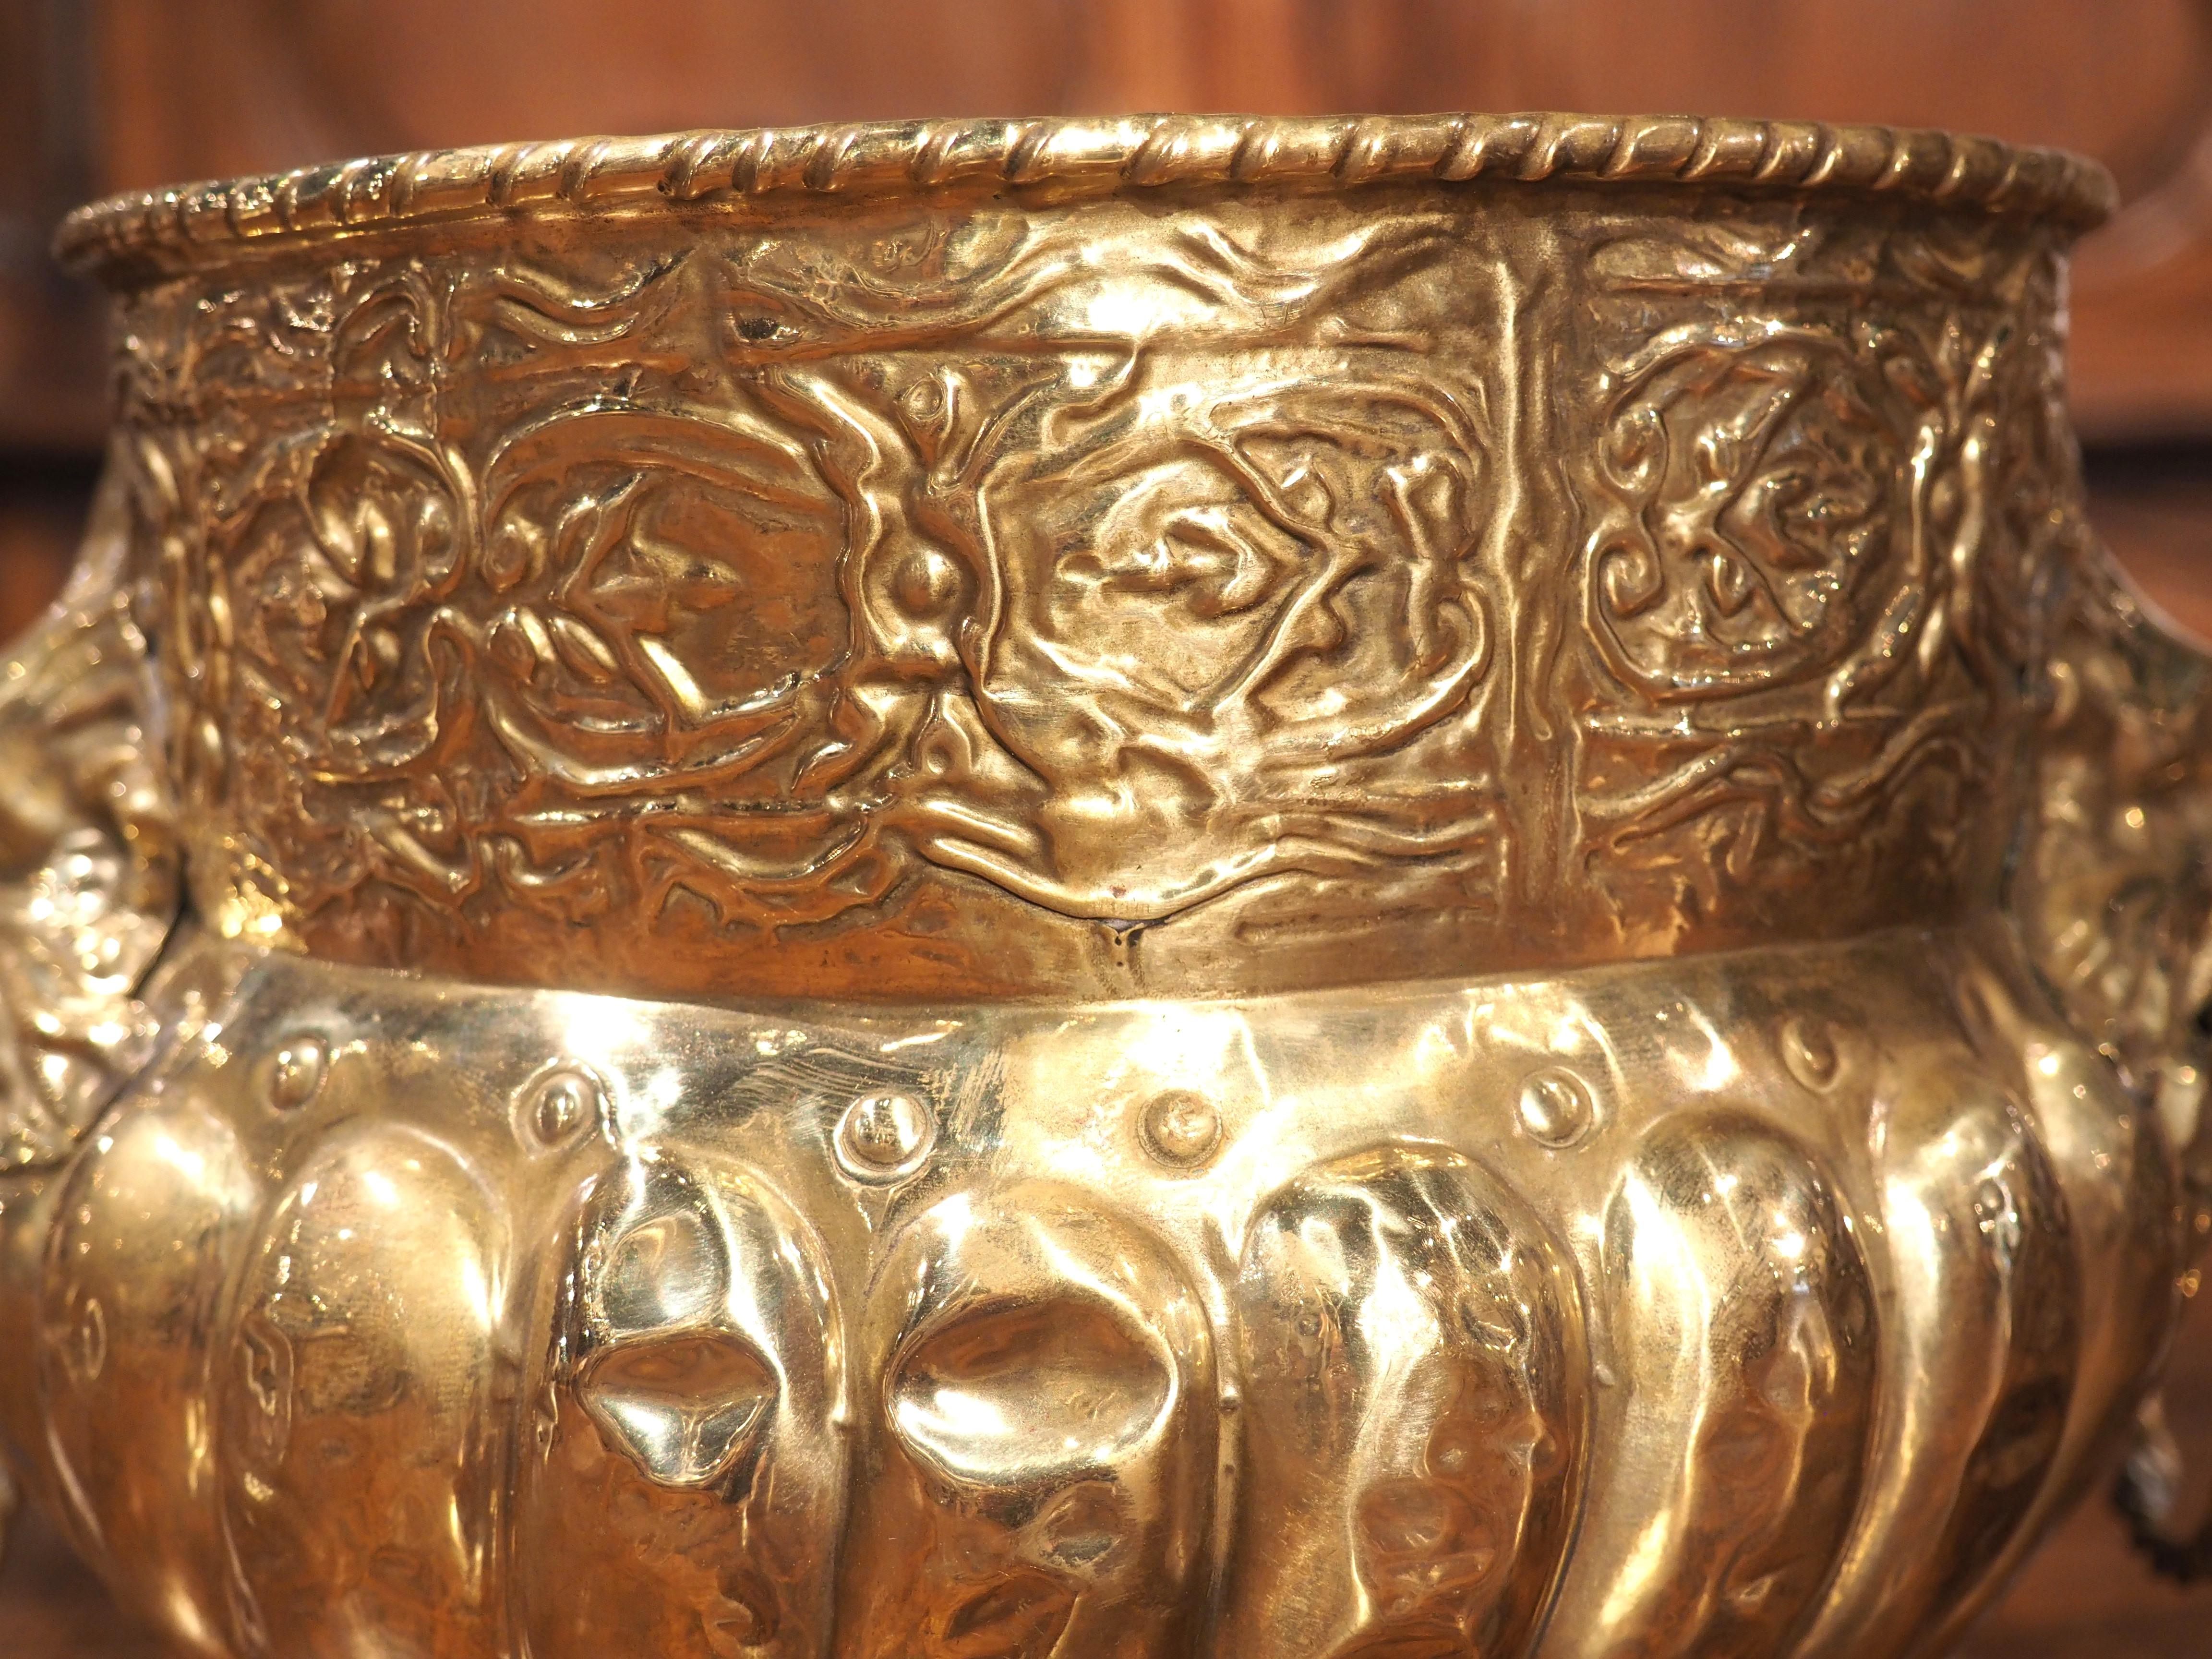 Repoussé Small Antique French Brass Repousse Jardiniere or Cachepot with Lions, Paw Feet